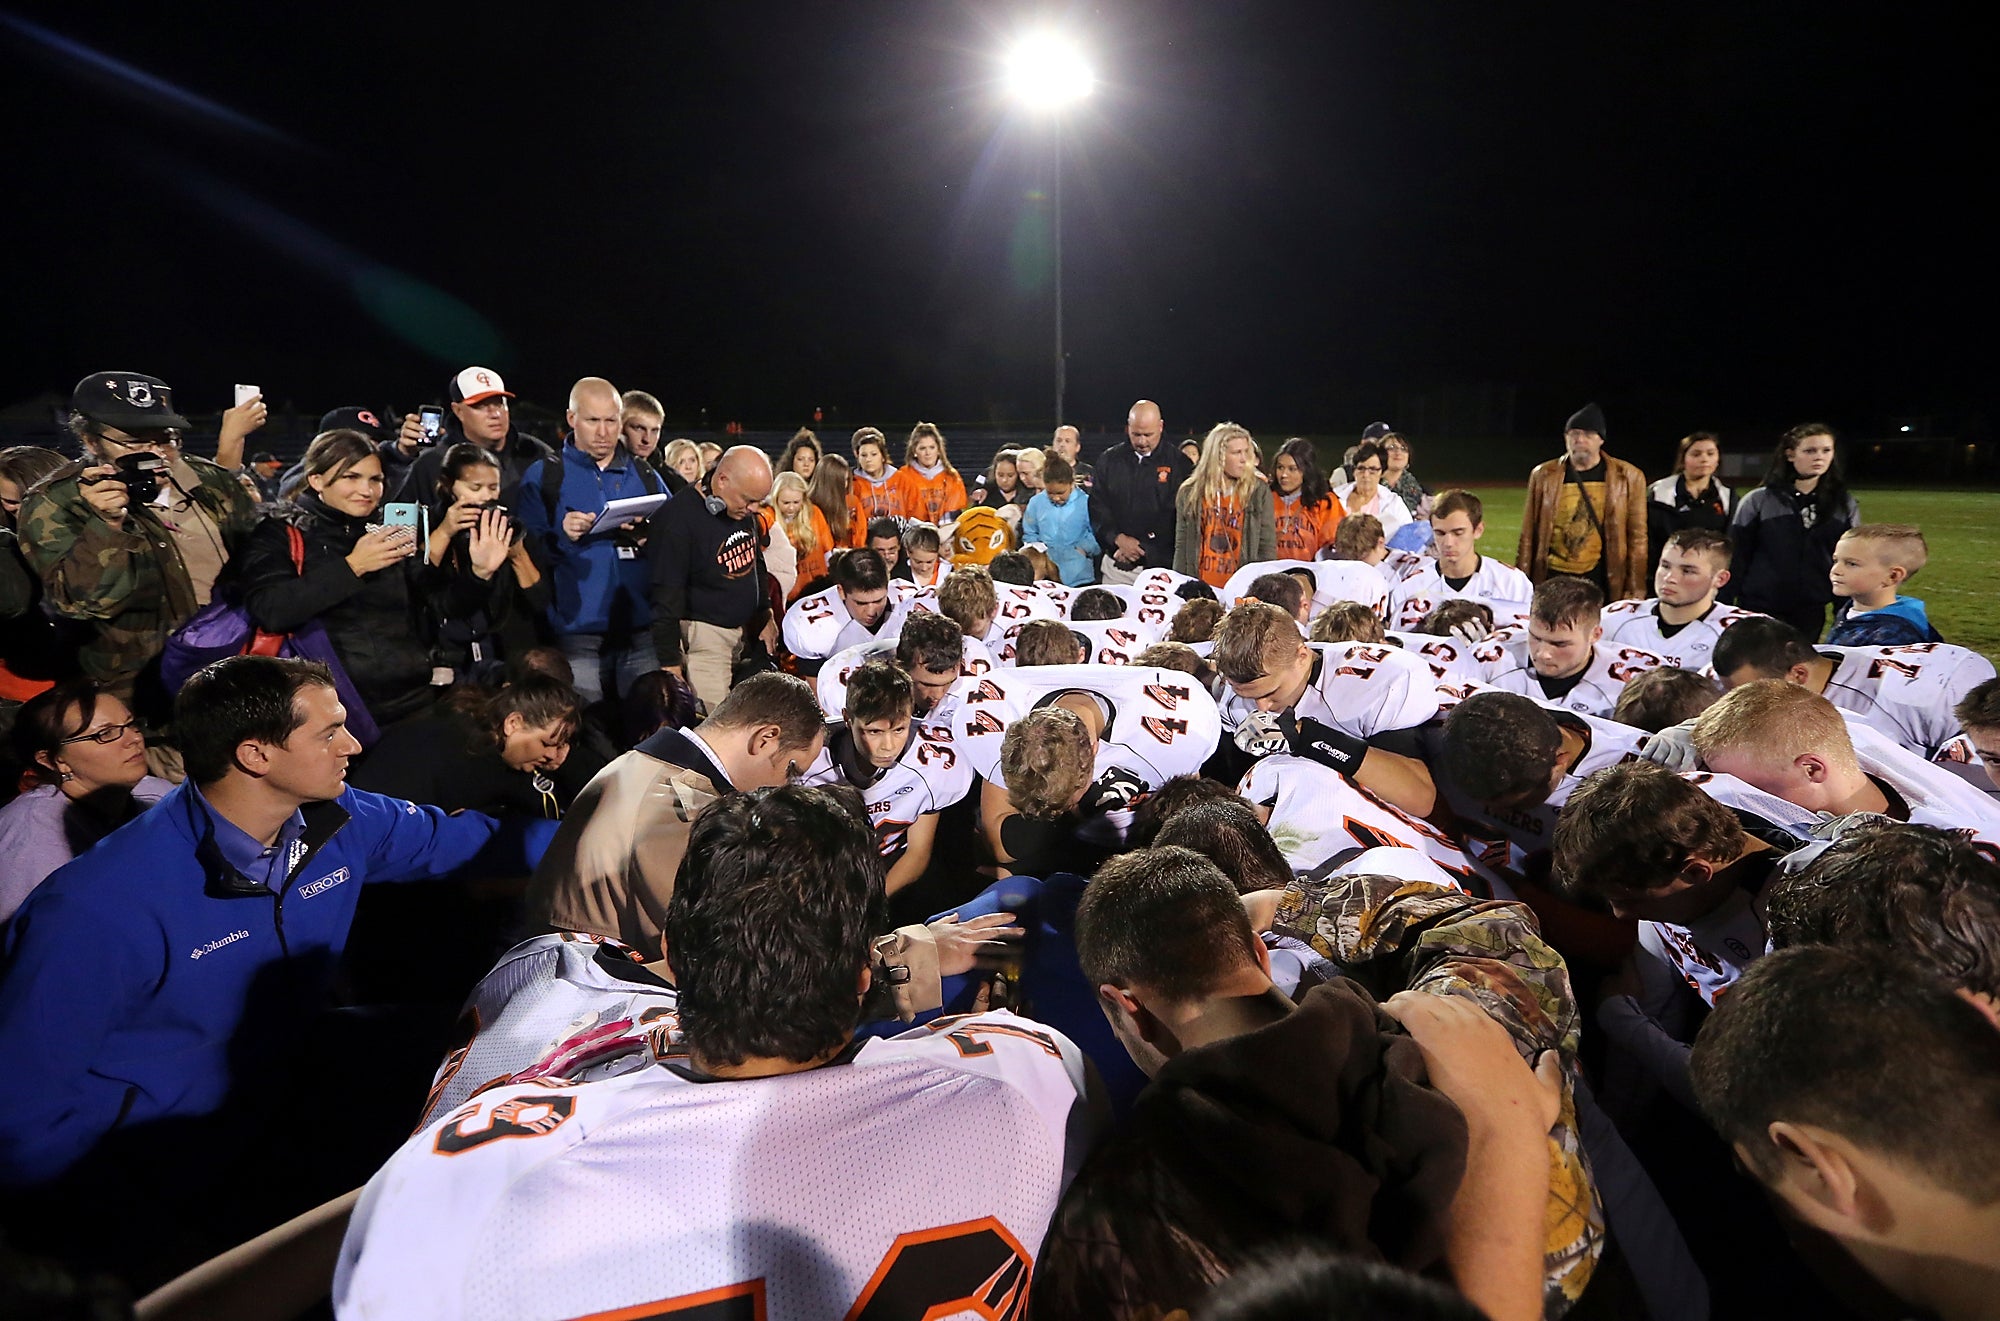 Assistant football coach Joseph Kennedy is surrounded by football players as they kneel and pray with him on the field after their game in 2015.